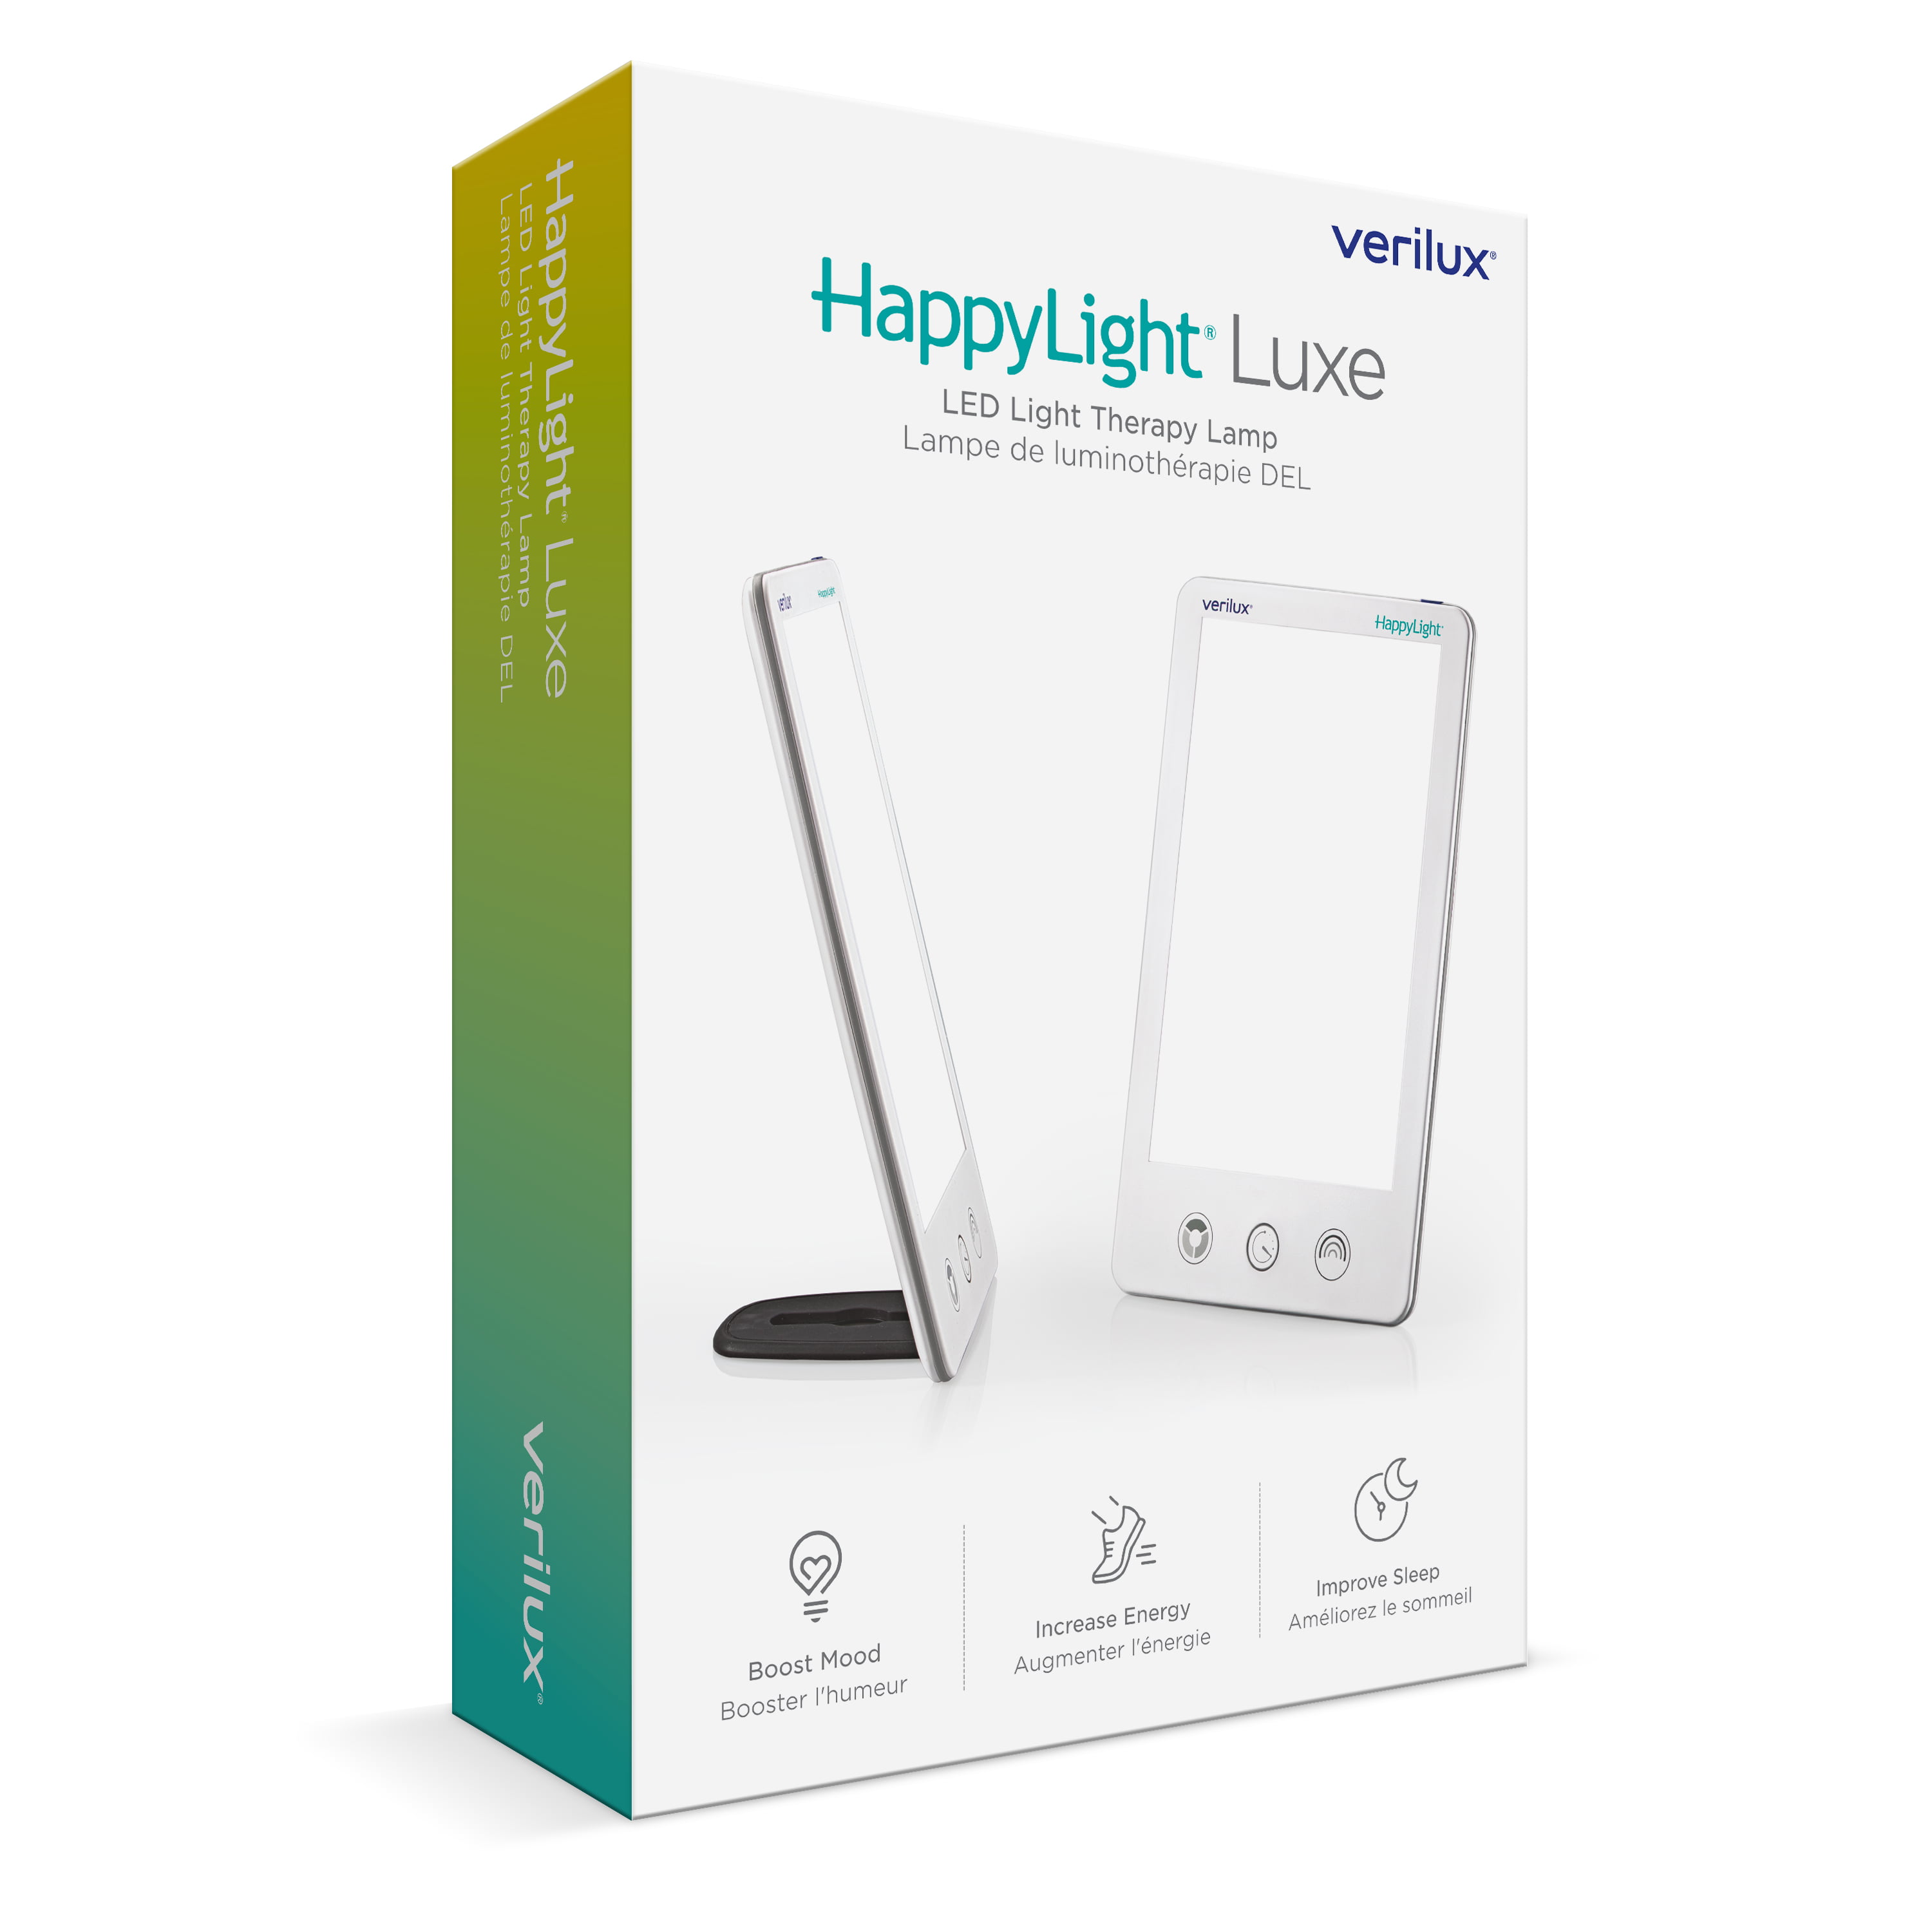 Verilux HappyLight® VT43 Luxe 10,000 Lux LED Bright White Light Therapy with Adjustable Brightness, Color, and Countdown Timer, 53 sq. in. Lens Size - Walmart.com